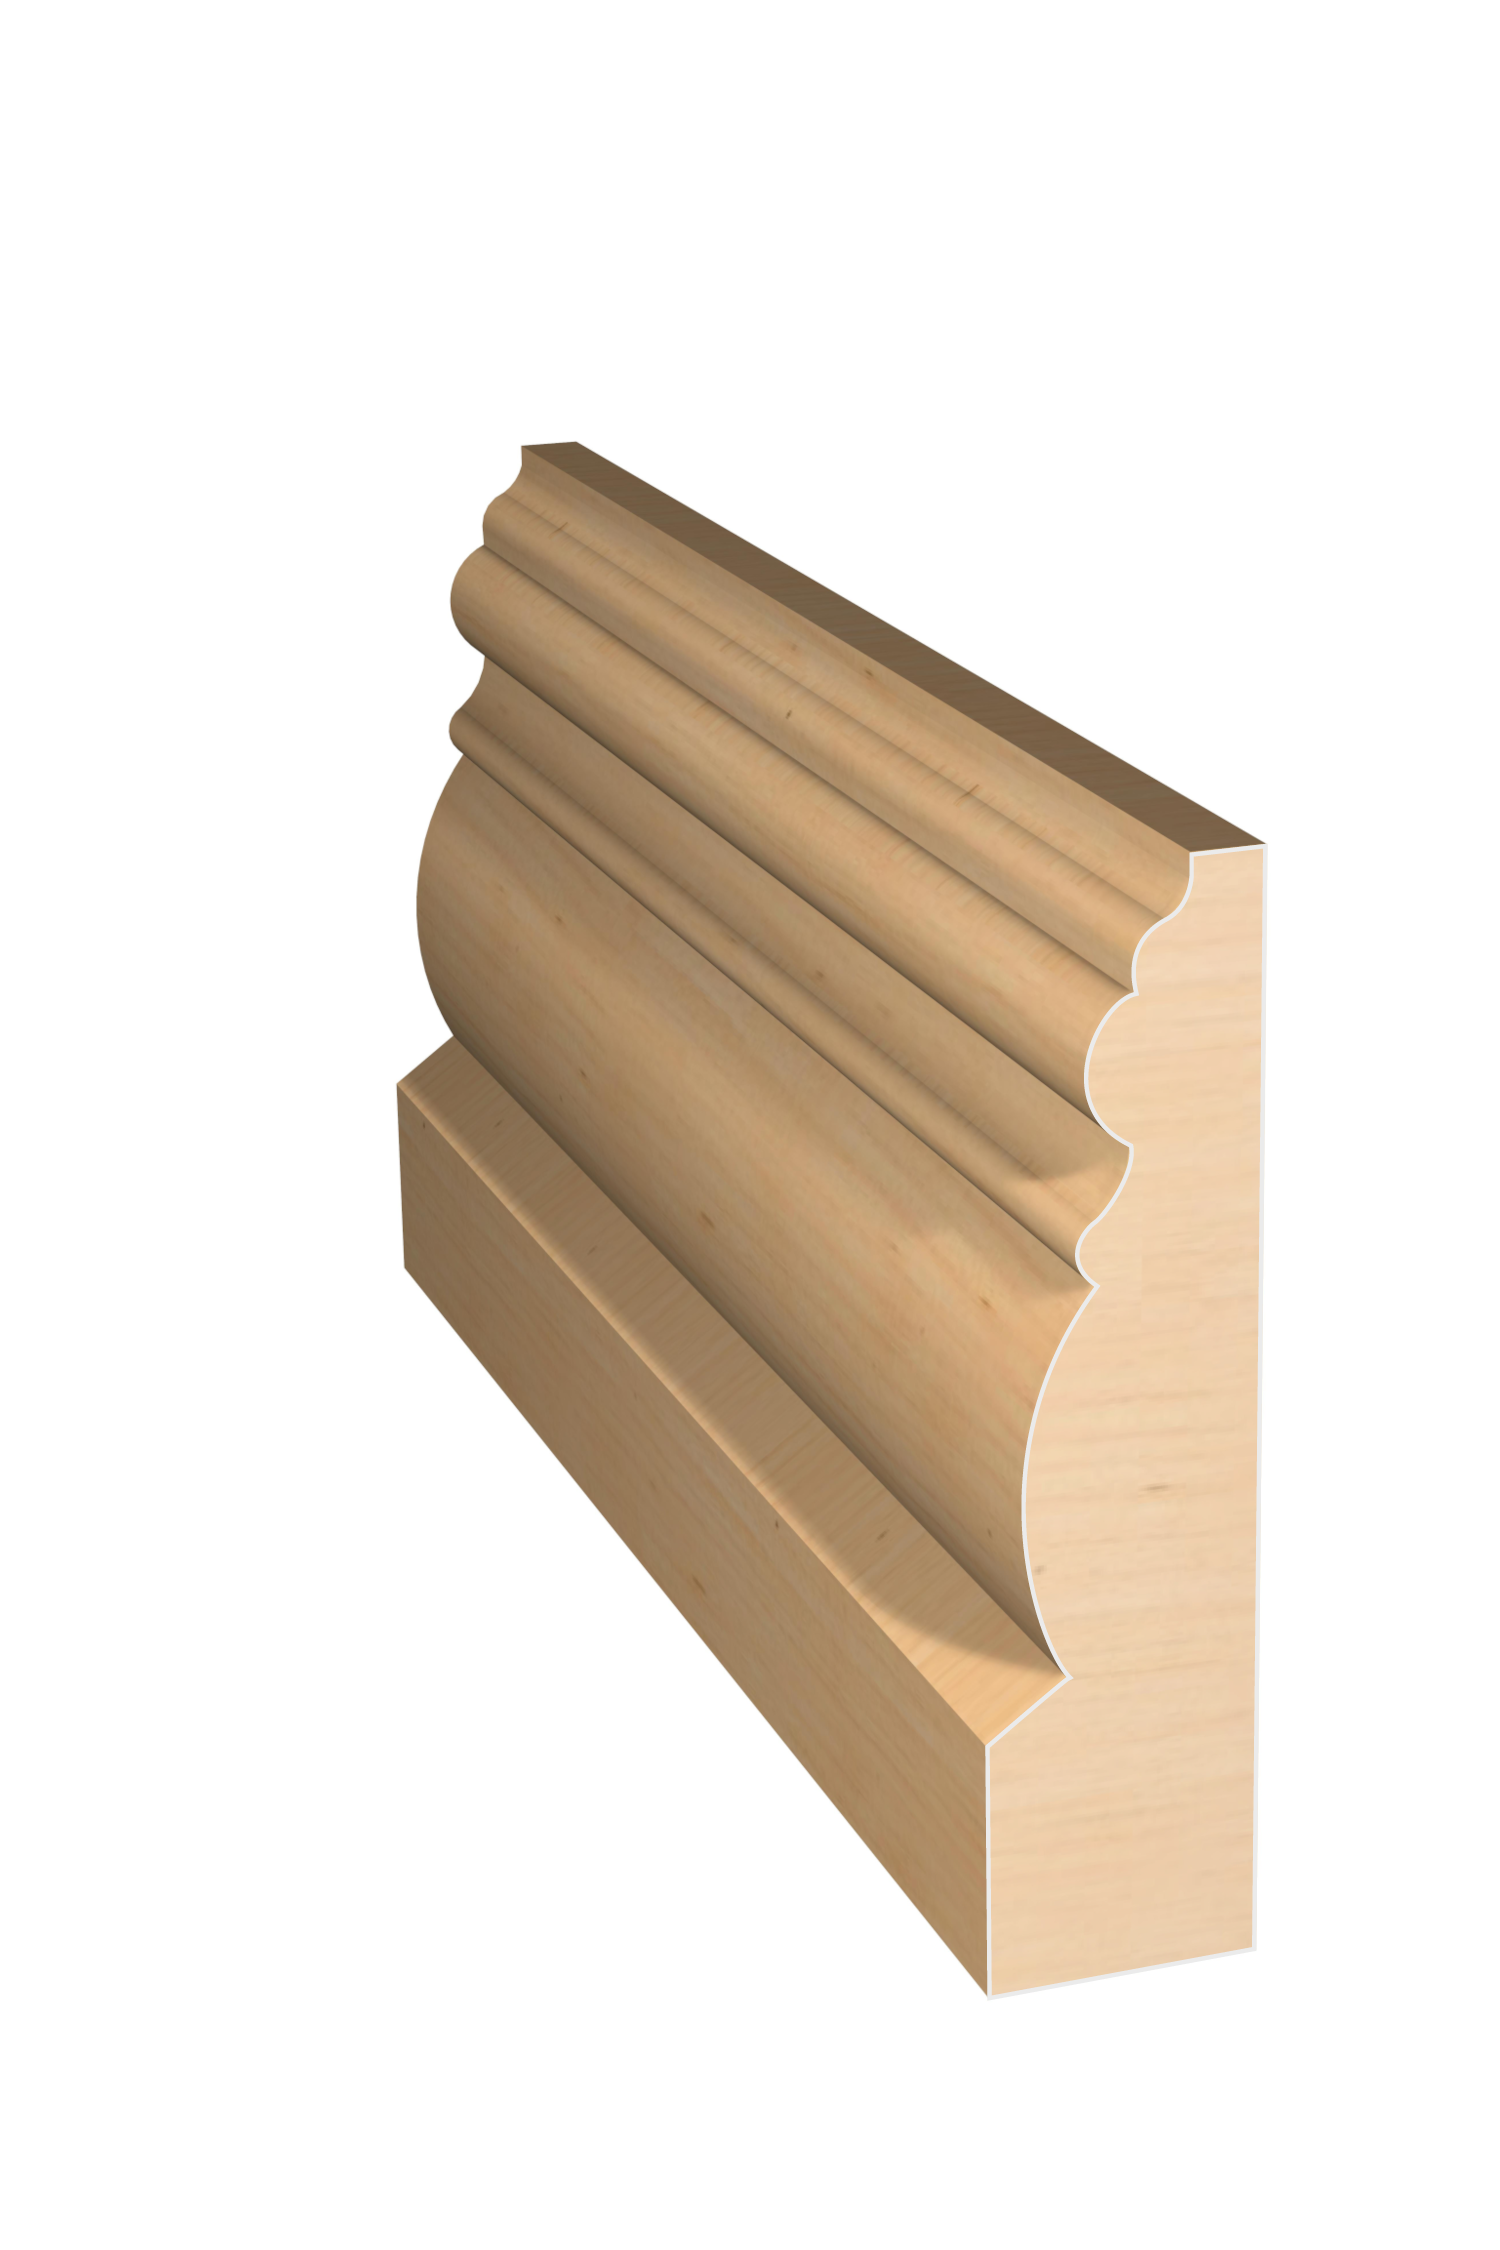 Three dimensional rendering of custom casing wood molding CAPL327 made by Public Lumber Company in Detroit.